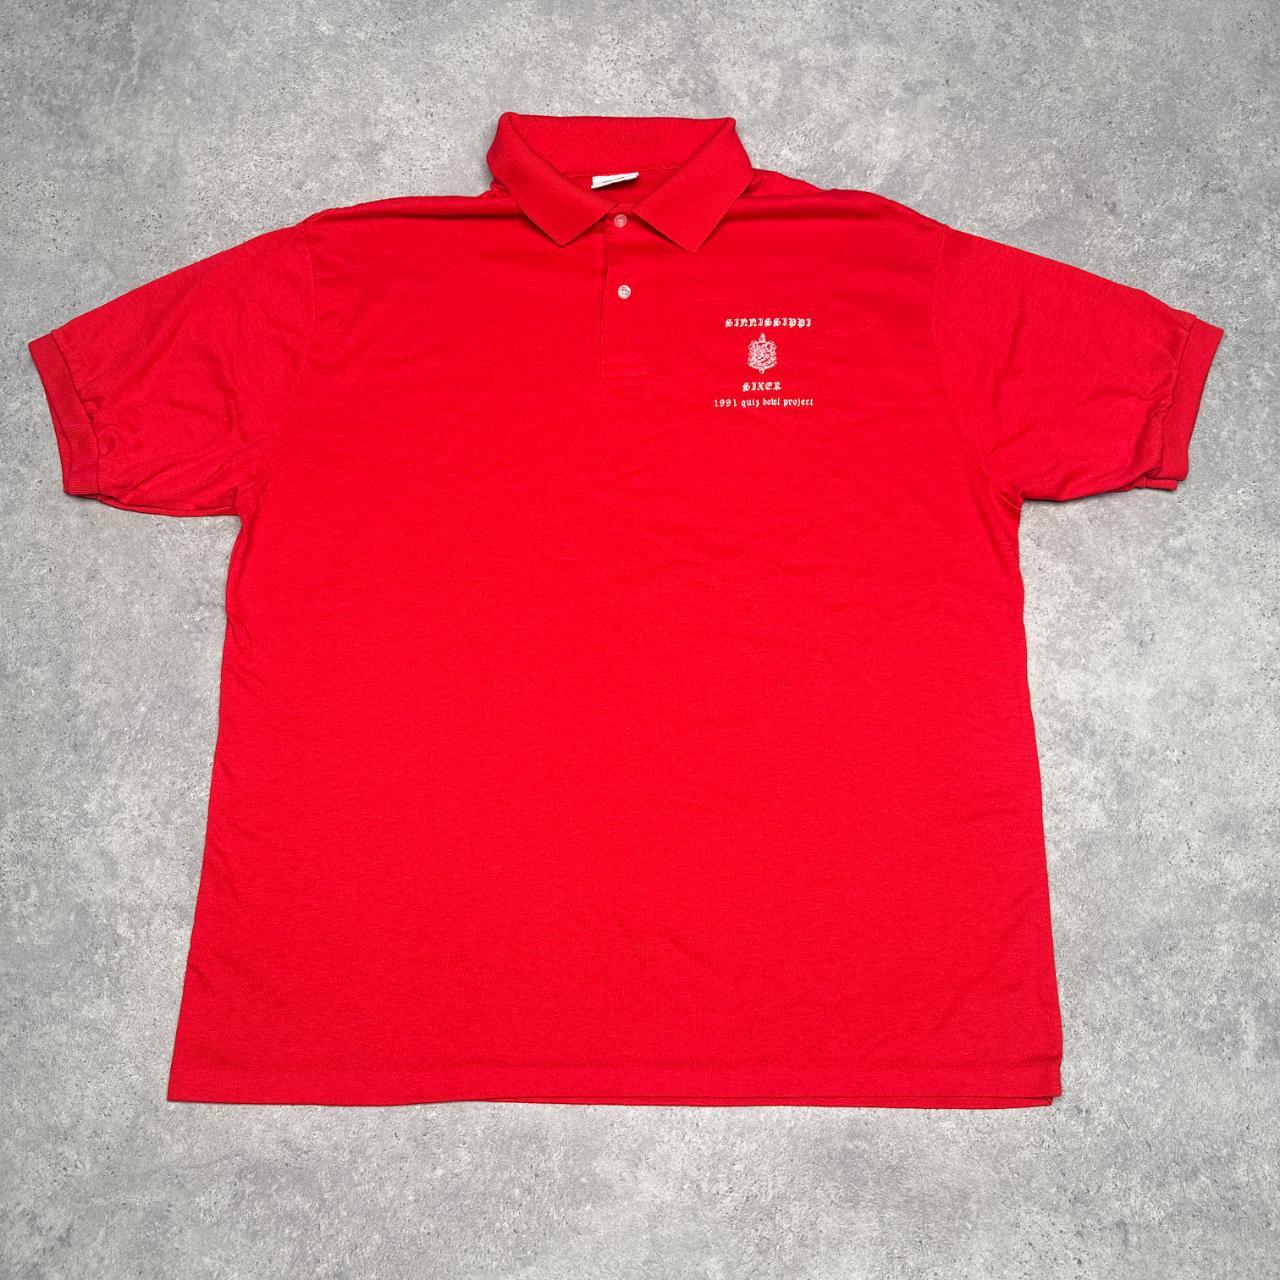 RED VINTAGE AMERICAN POLO SHIRT This vintage 90s... - Depop